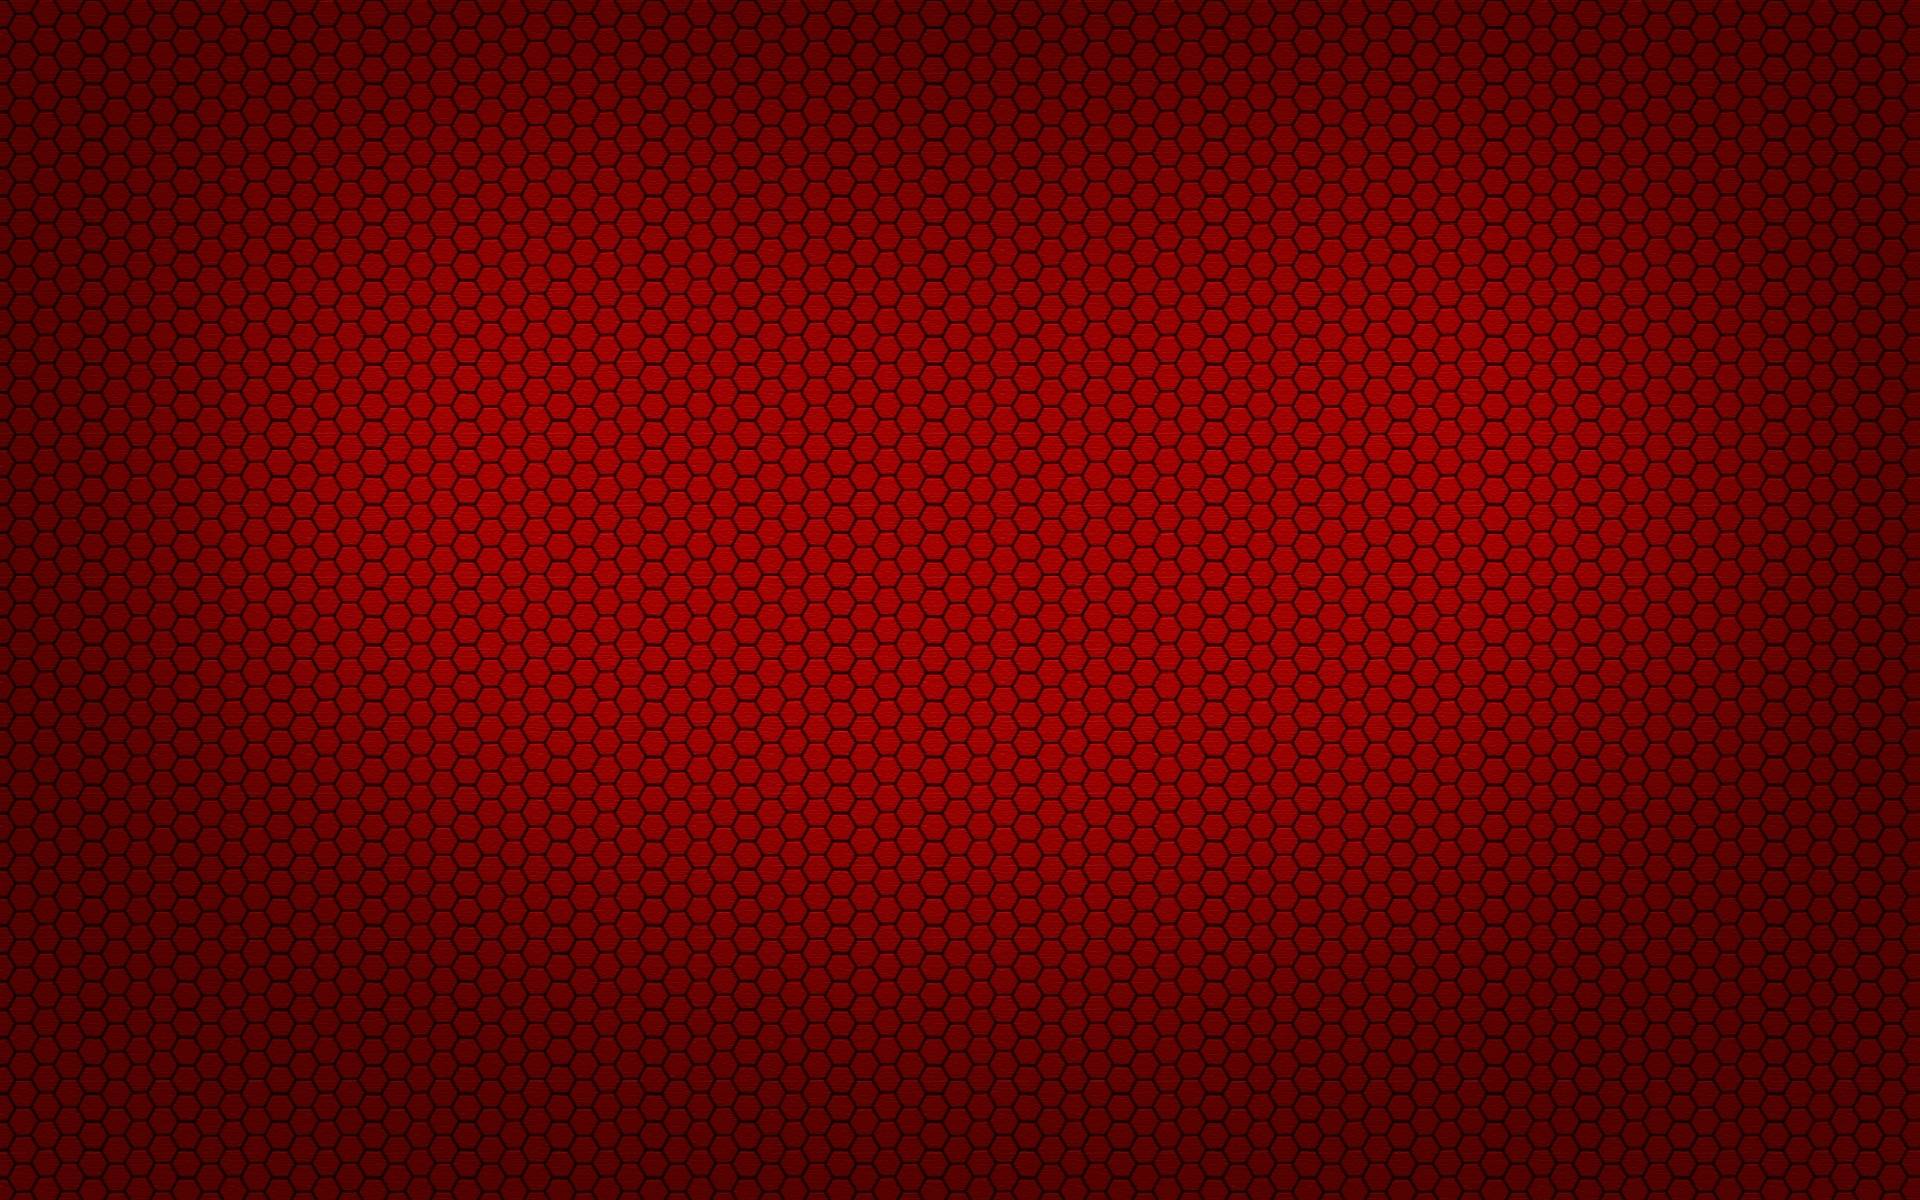 Red Honeycombs Texture. Background and Texture